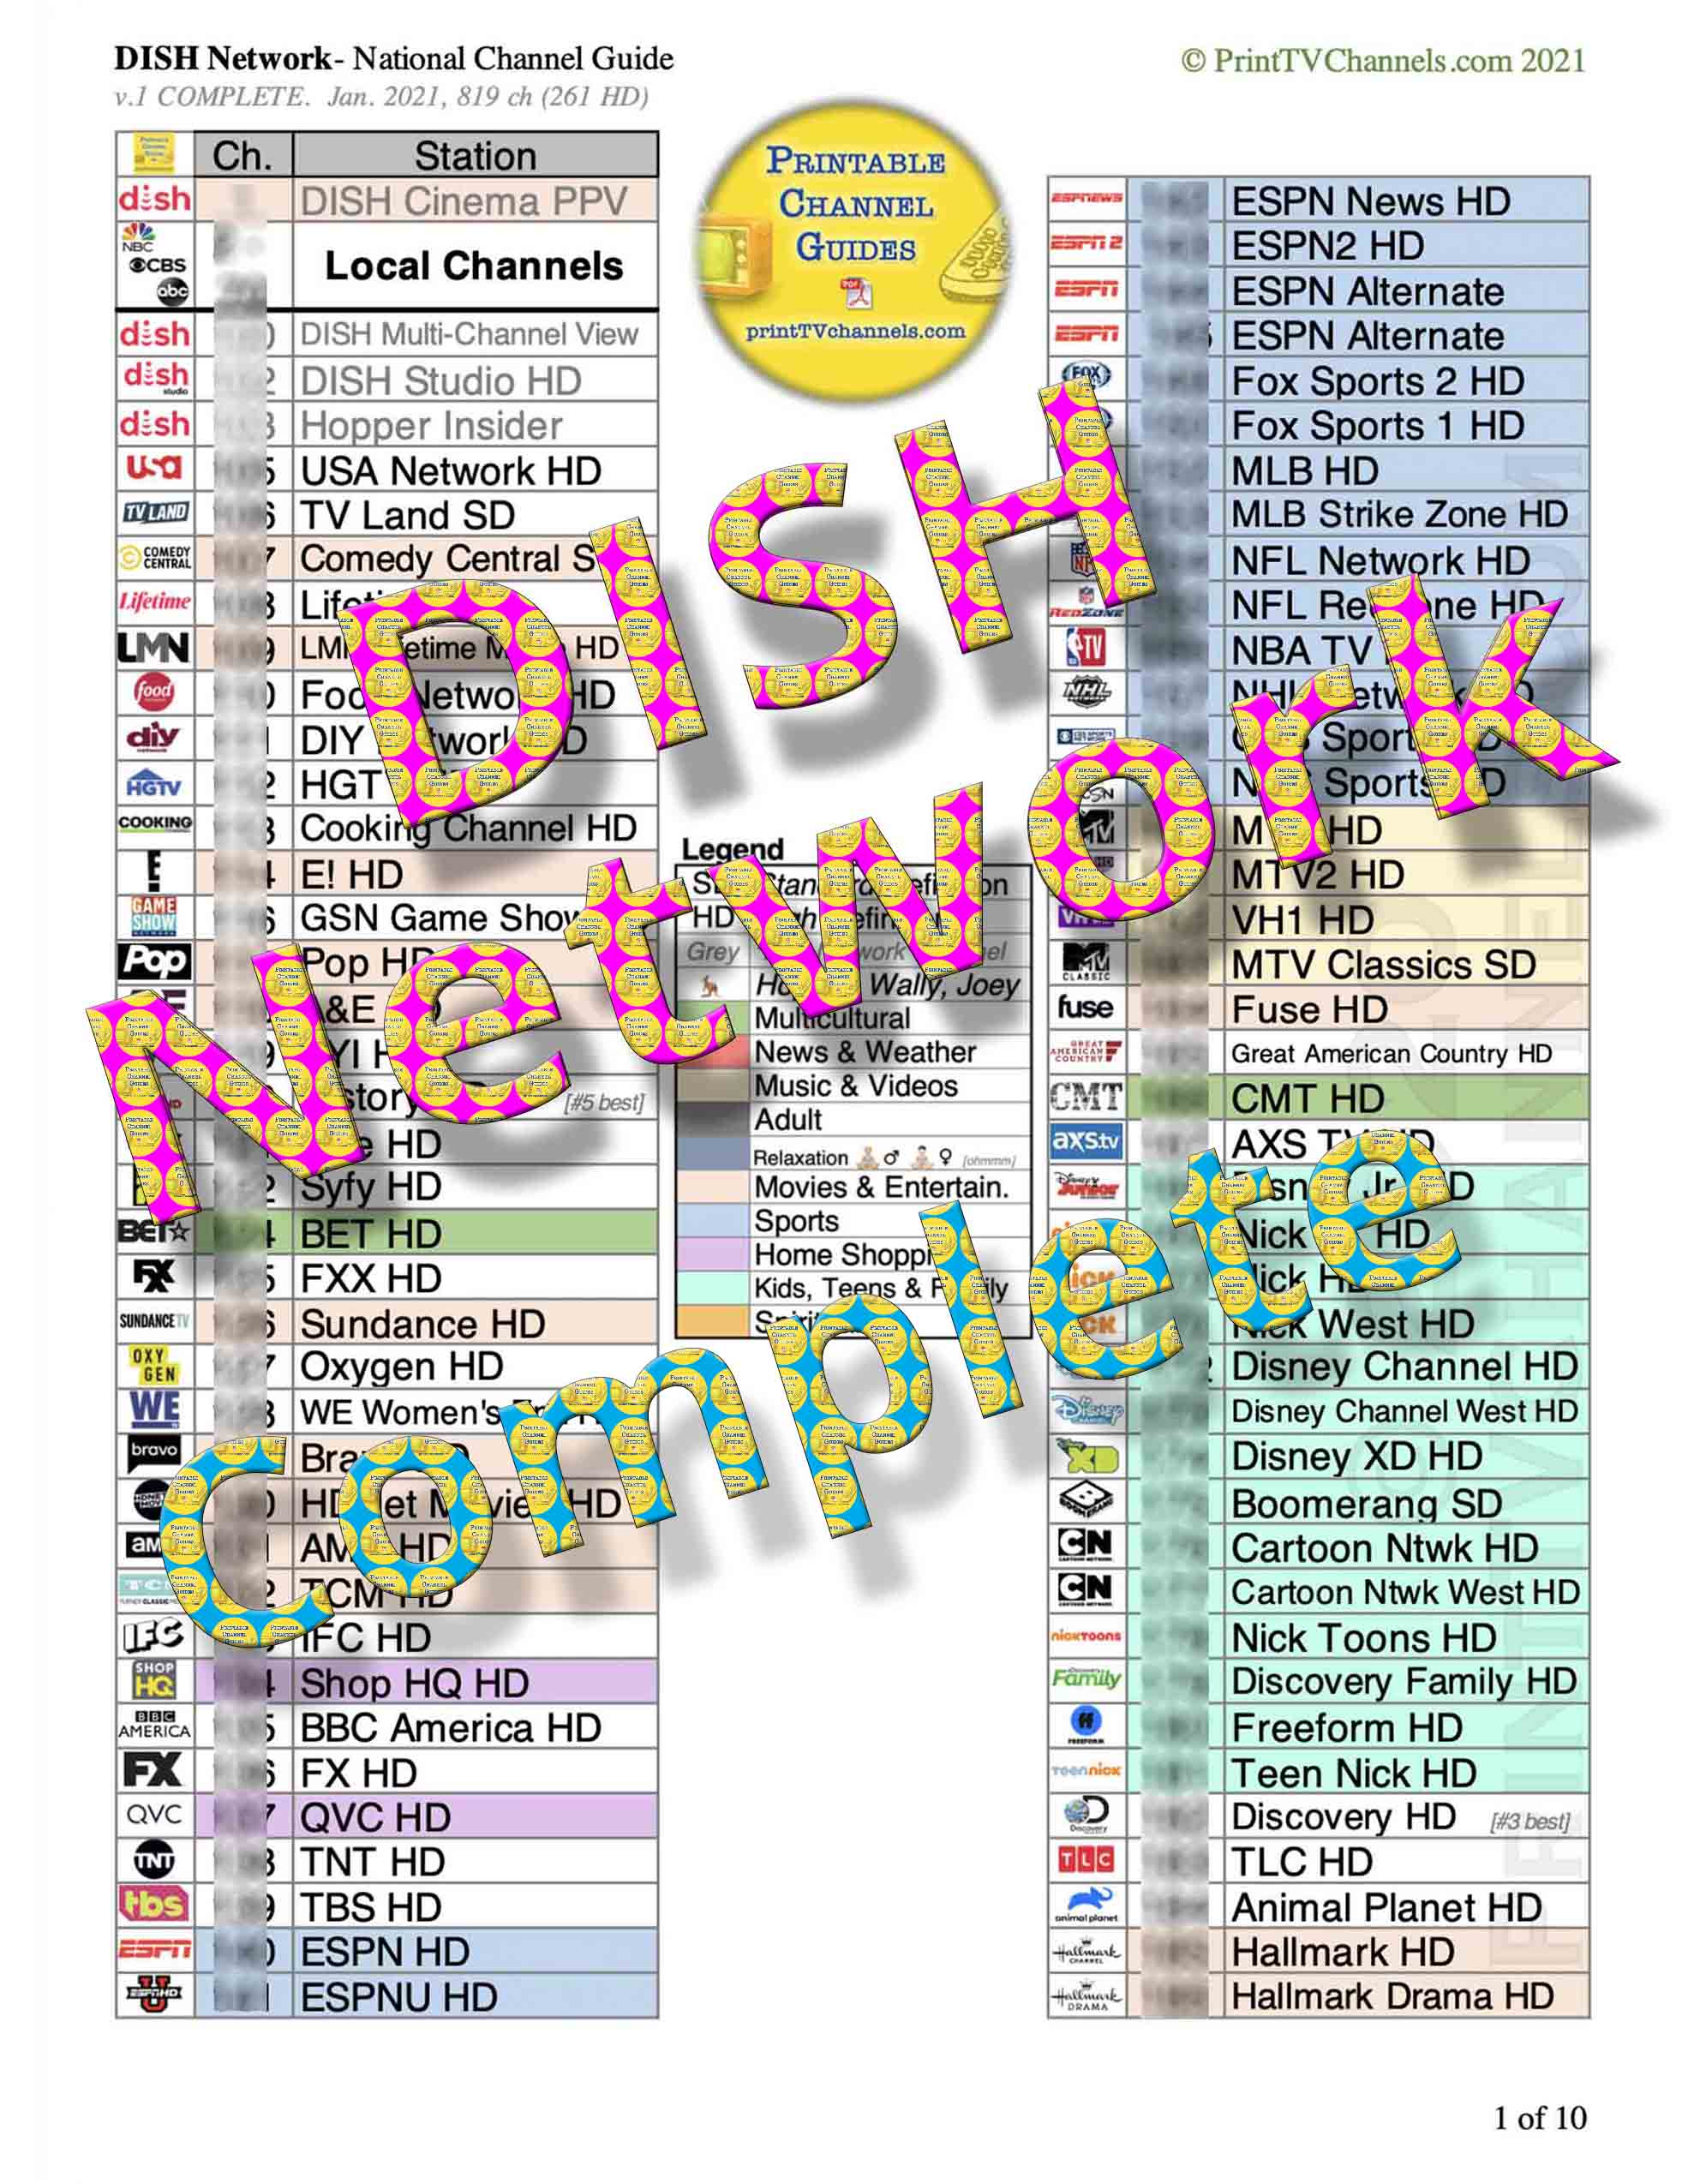 DISH TV Channel Guide NATIONWIDE Edited Version